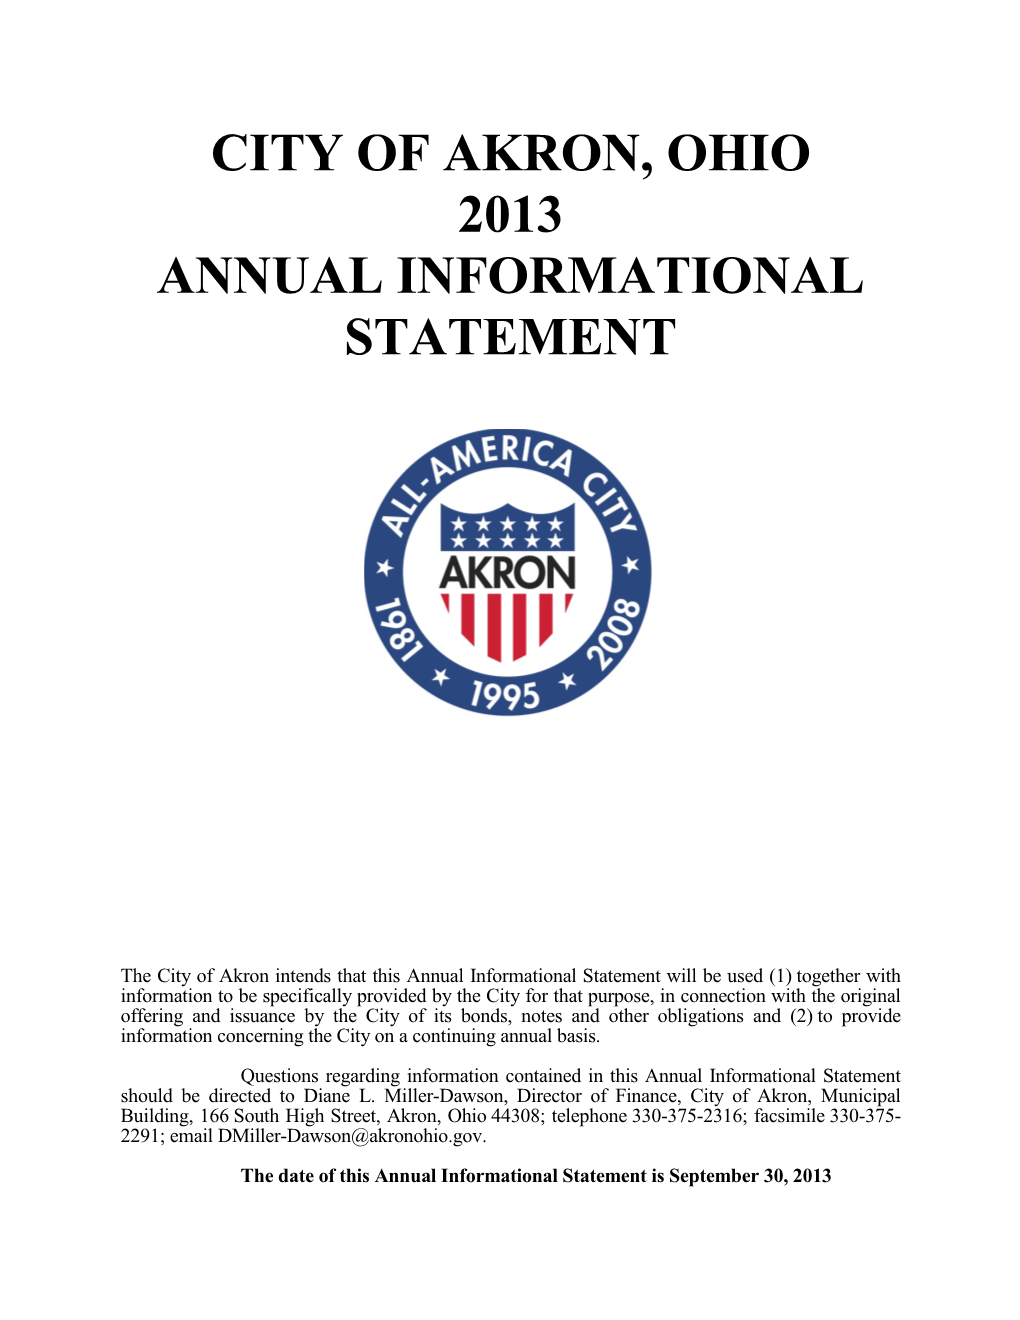 City of Akron, Ohio 2013 Annual Informational Statement